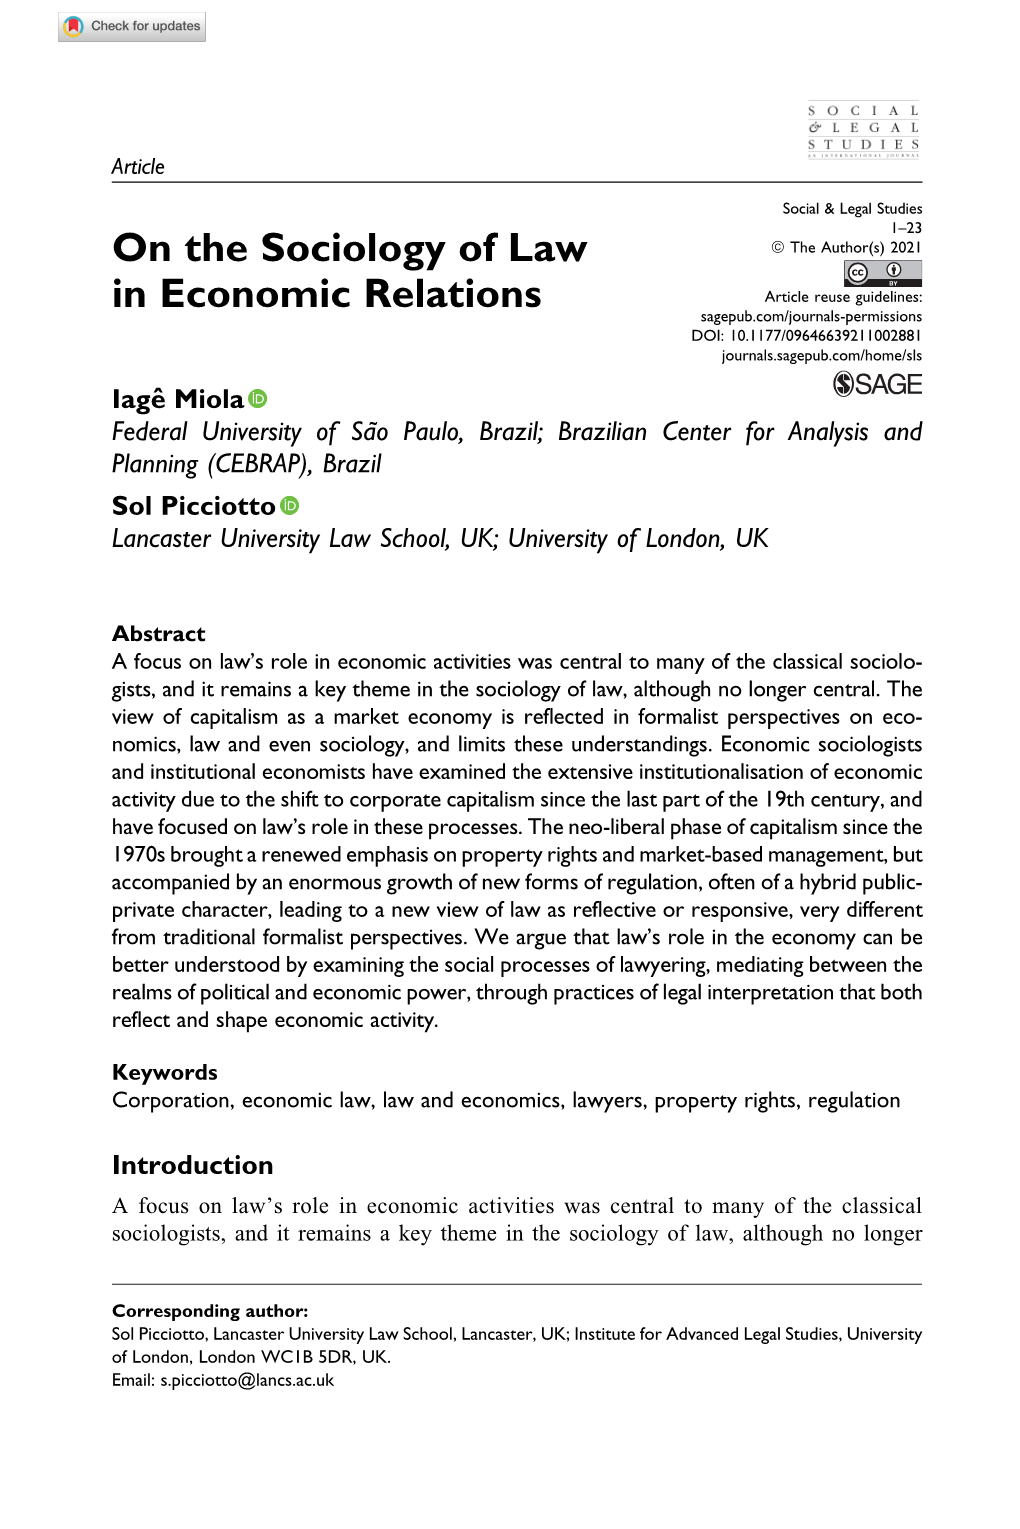 On the Sociology of Law in Economic Relations